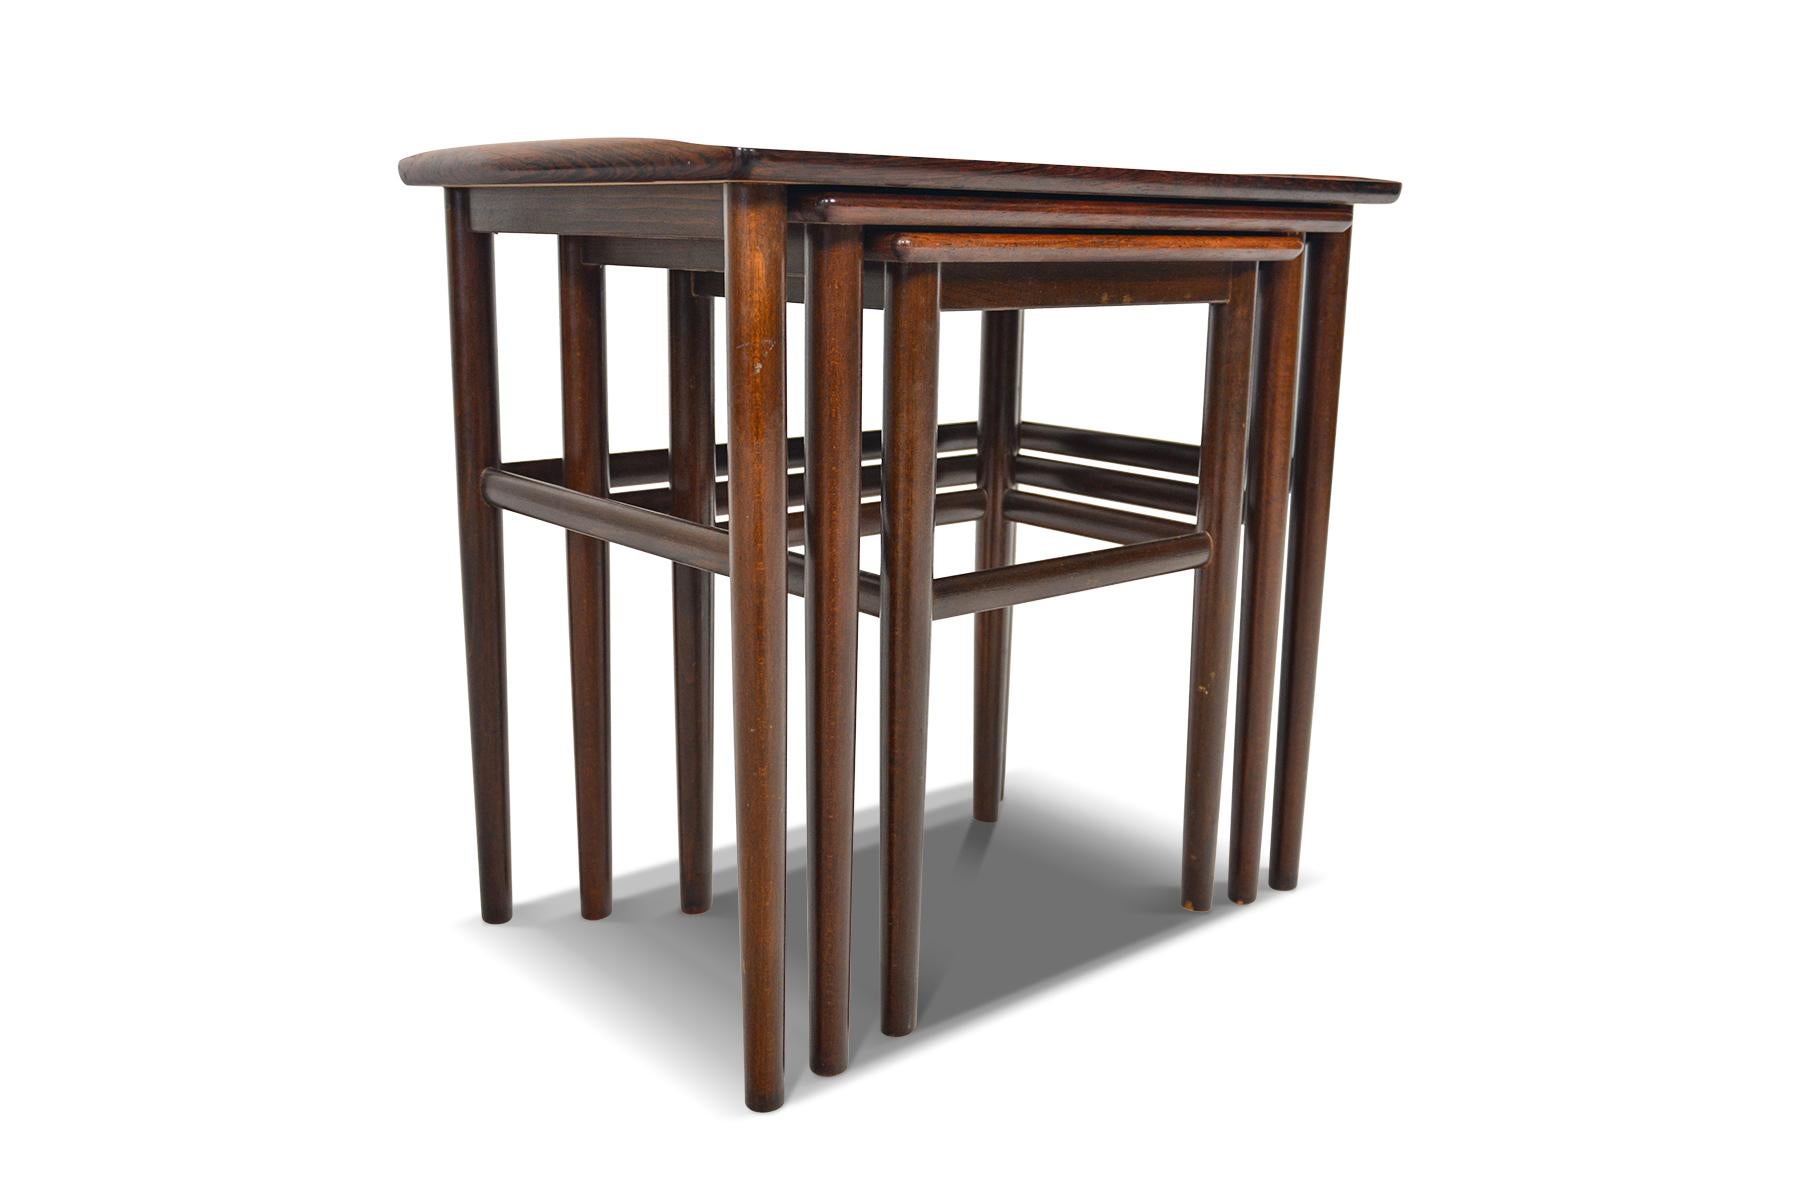 This beautiful set of Danish modern midcentury nesting tables in rosewood by Heltborg will make a fantastic addition to any home. Beautifully tapered legs keep this set simple and elegant, complimented by a softly banded rectangular table tops. In